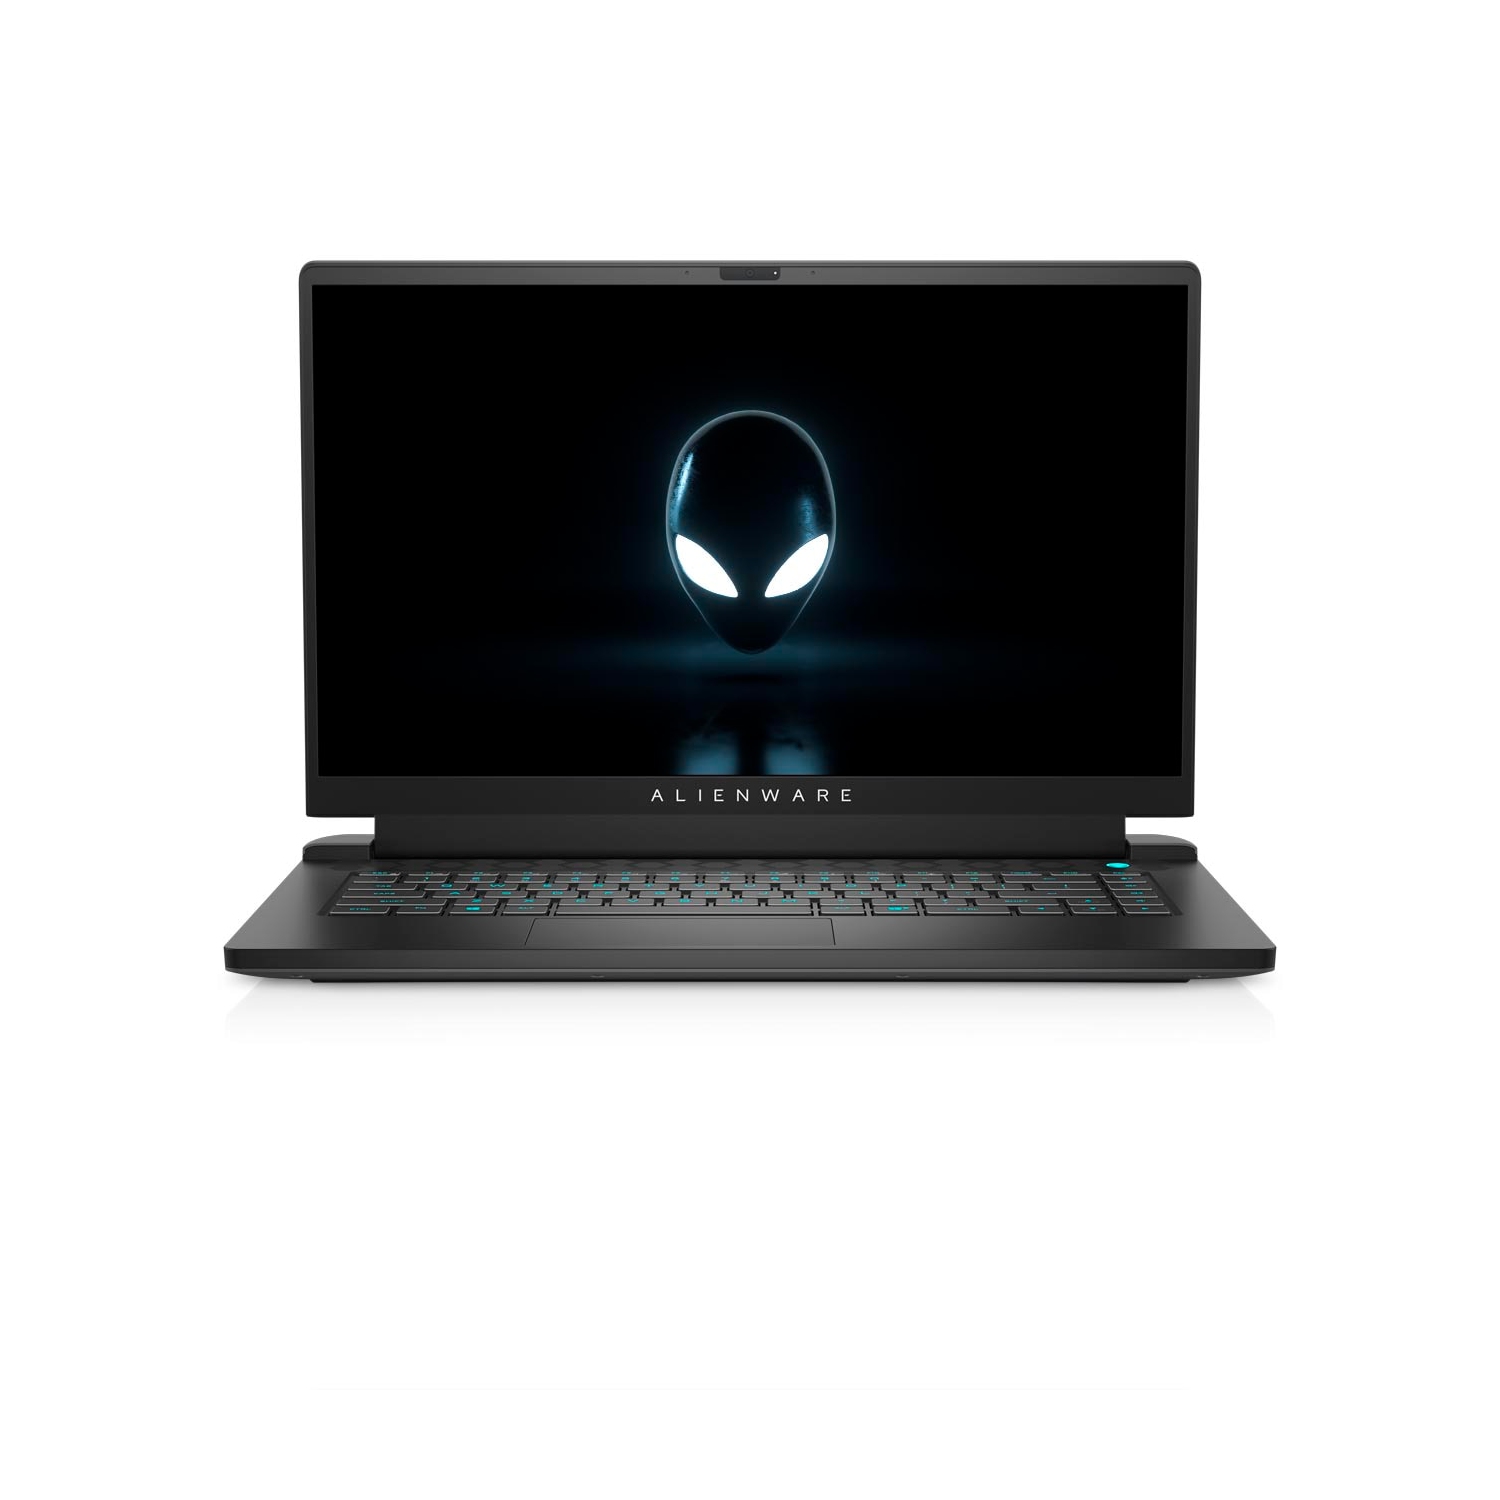 Refurbished (Excellent) - Dell Alienware m15 R5 Ryzen Edition Gaming Laptop (2021), 15.6" QHD, Core Ryzen 7, 1TB SSD, 16GB RAM, RTX 3070, 8 Cores @ 4.6 GHz Certified